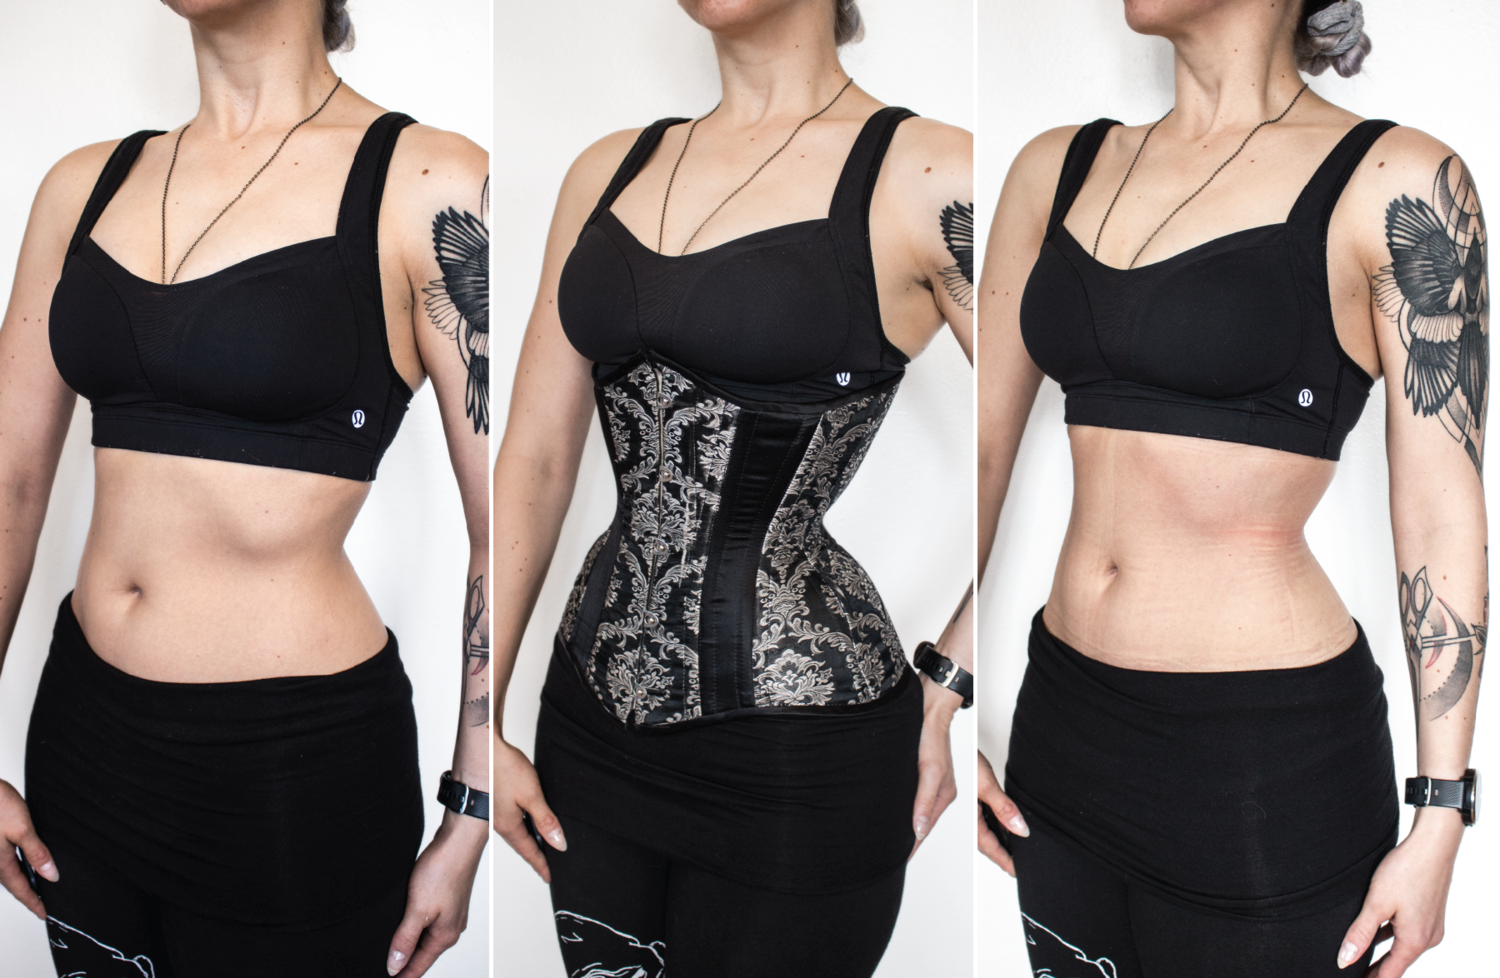 I Tried Wearing A Corset For 3 Days